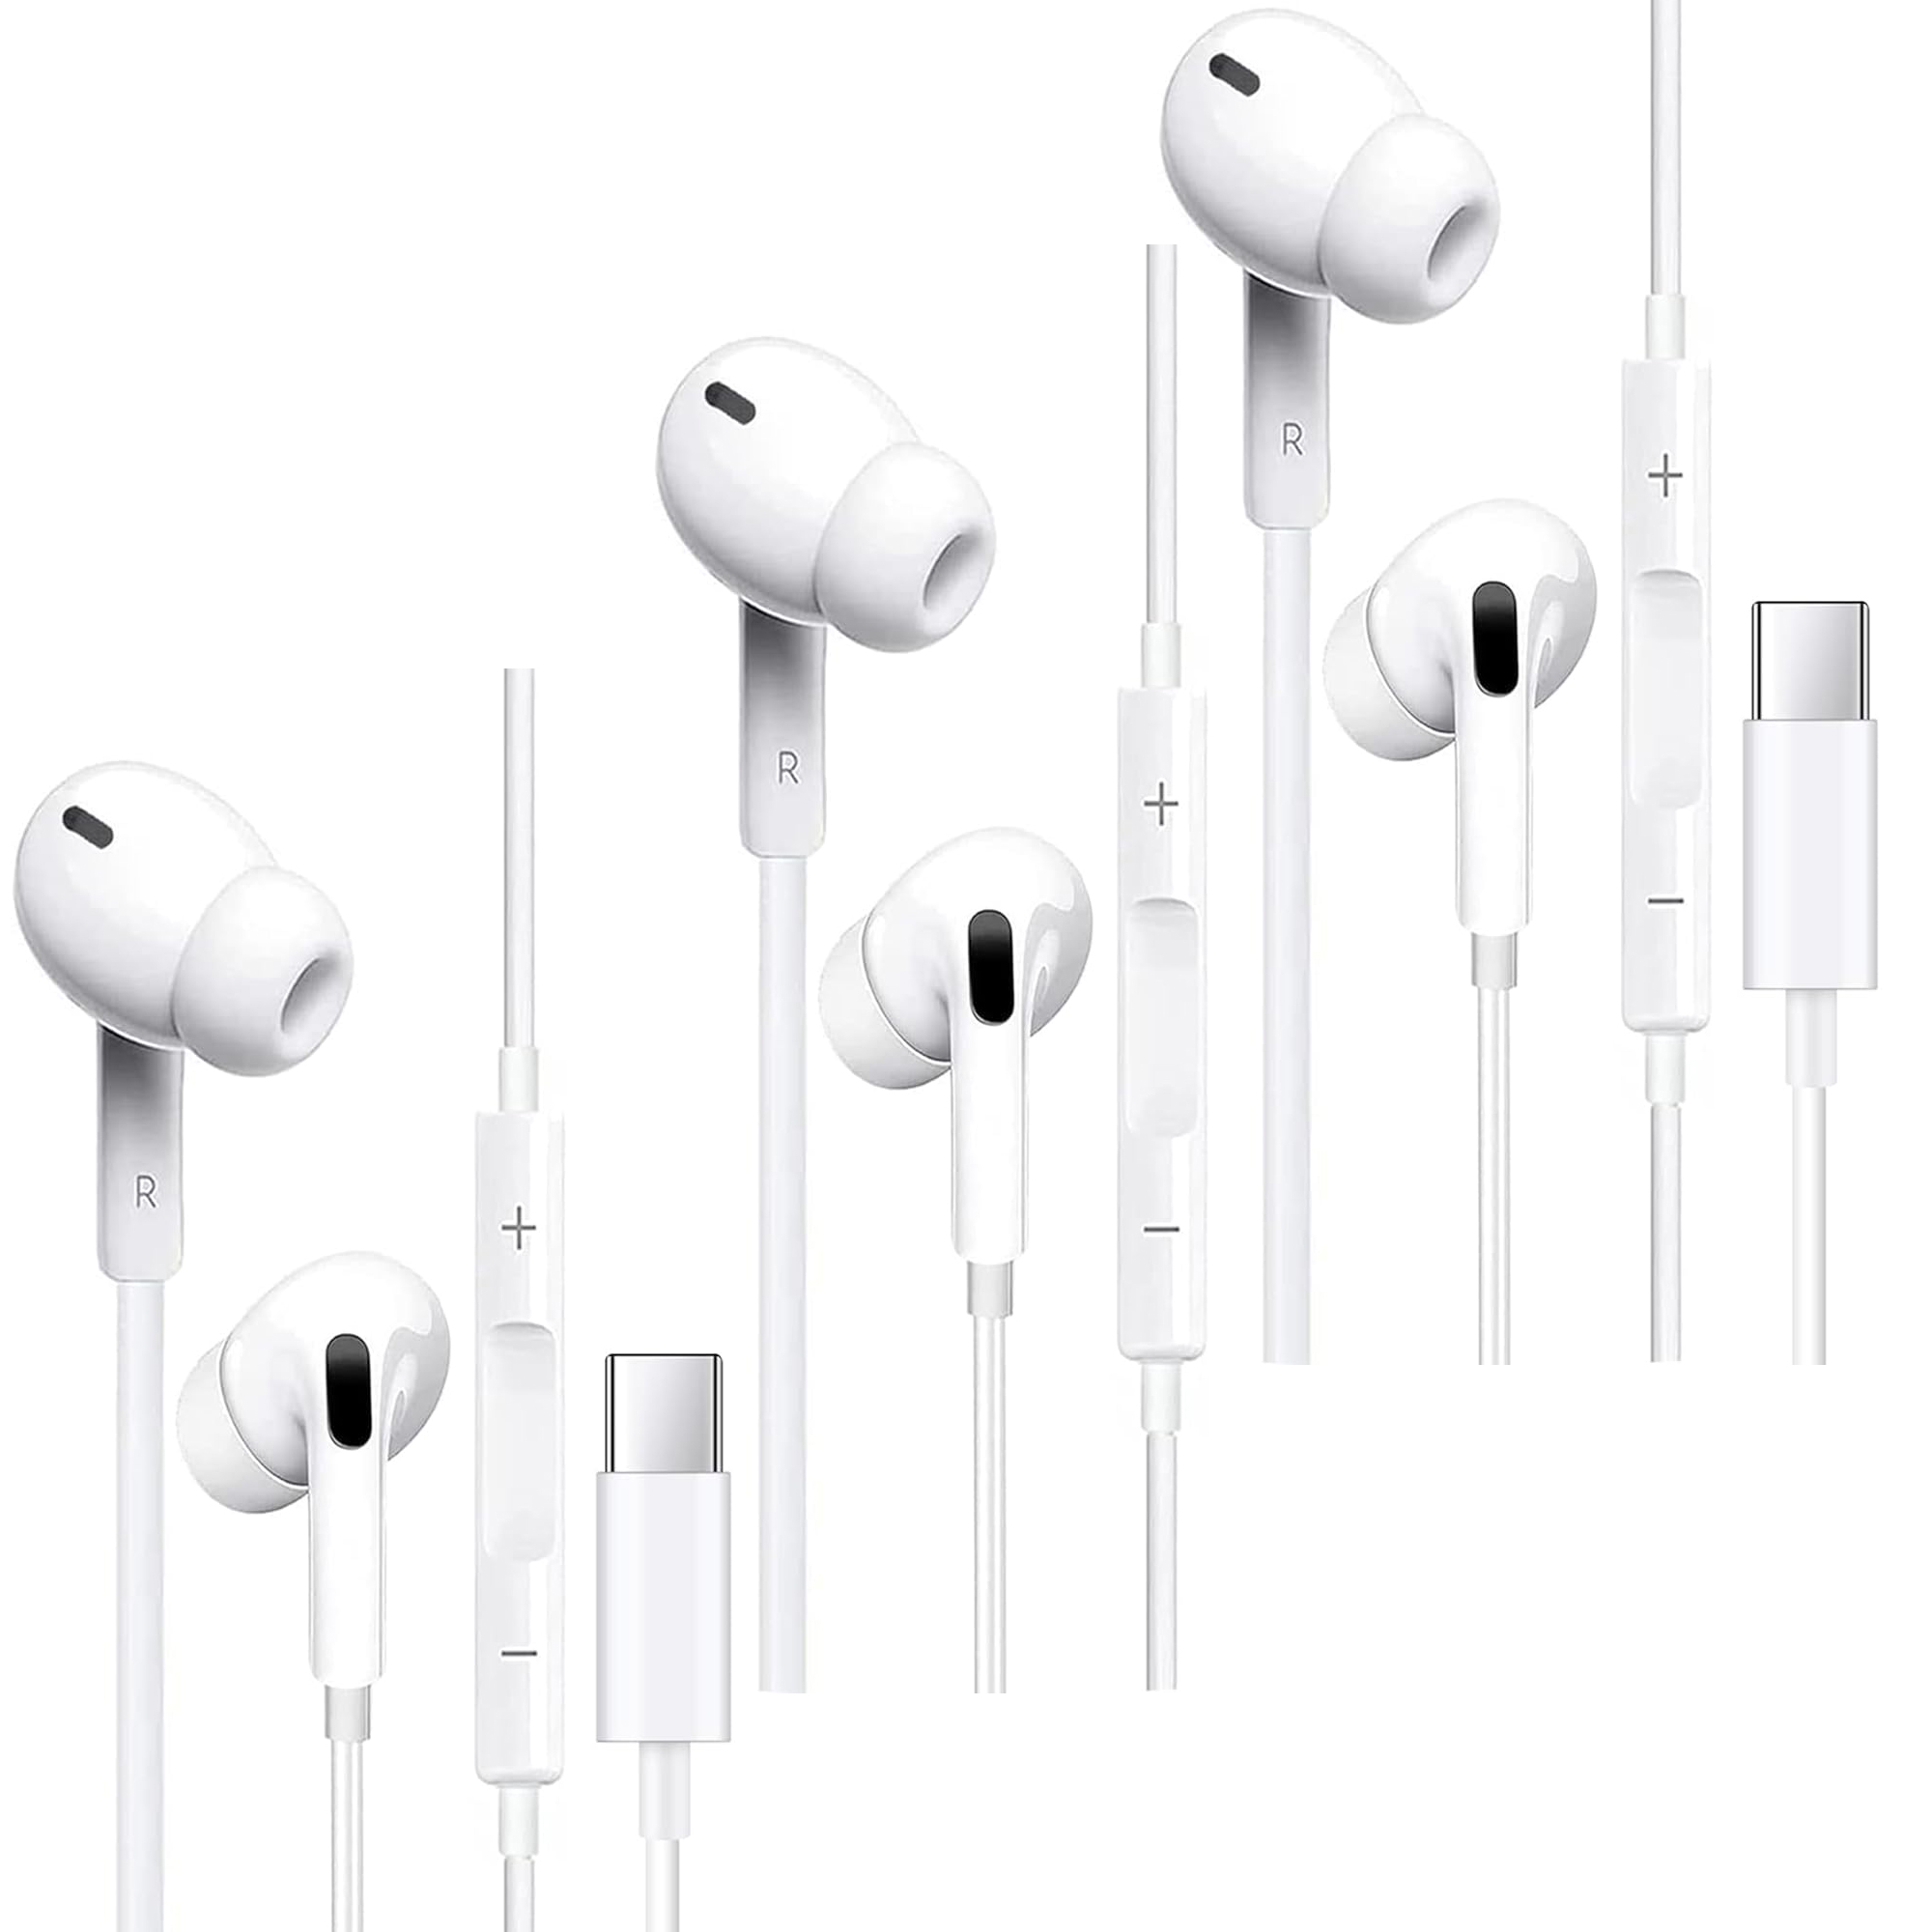 USB C Headphones Pack of 3, Type C Wired Earbuds, In-Ear Headphones with Microphone Noise Canceling Stereo, Earphones Compatible with iPhone 15/Samsung S23/Android/iPad Pro and Most USB C Devices - image 1 of 7